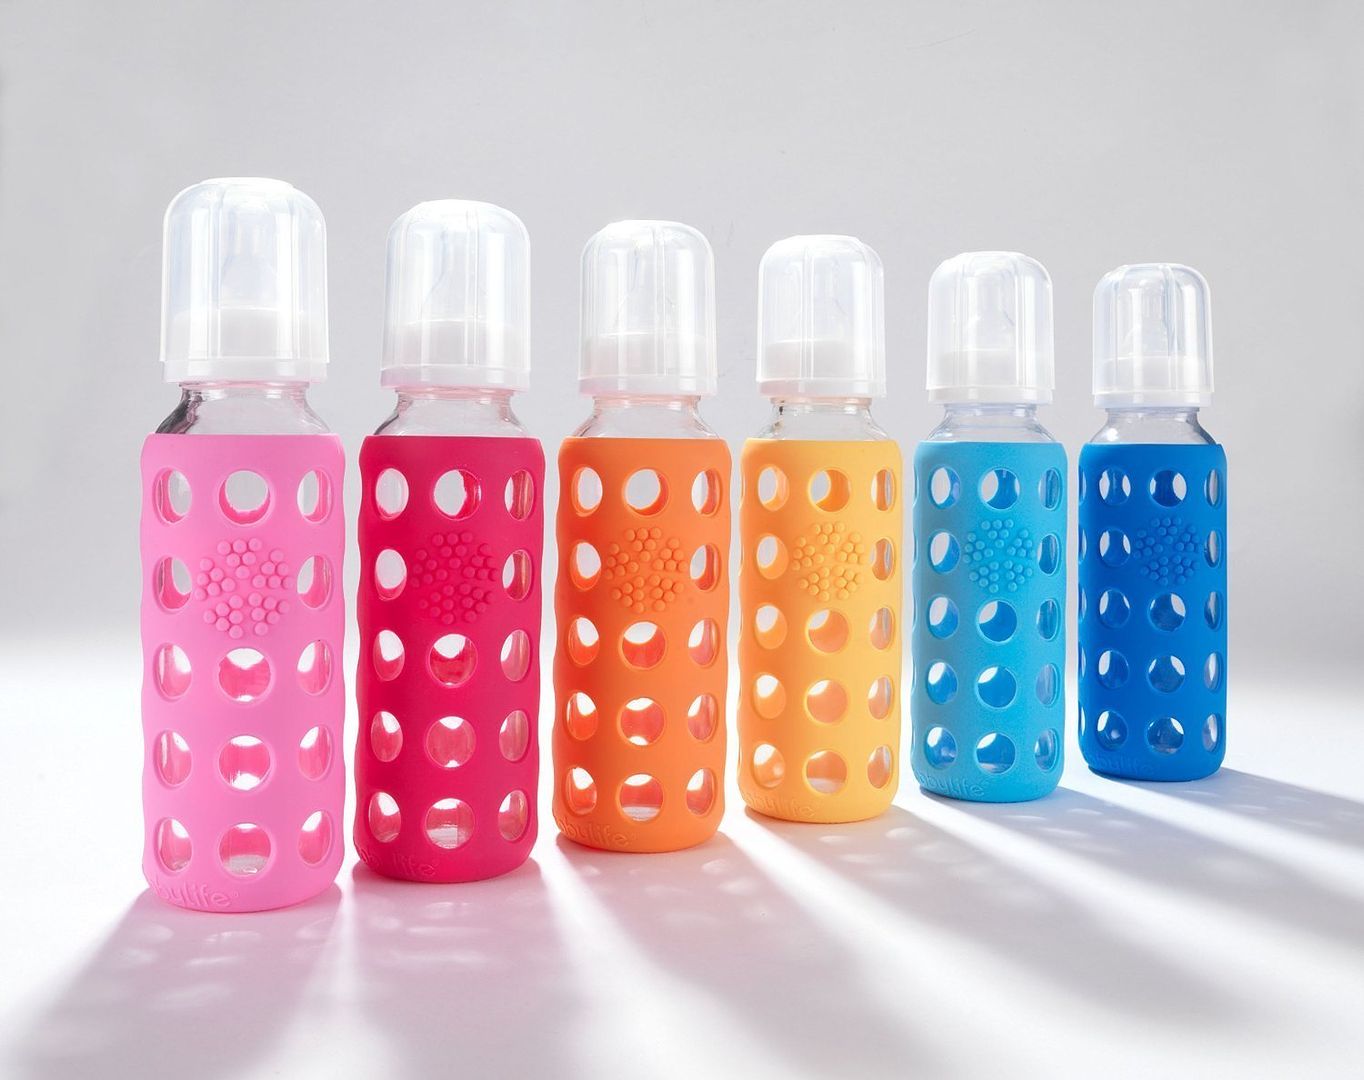 Lifeproof glass baby bottles: Our pick for some of the very best glass baby bottles around